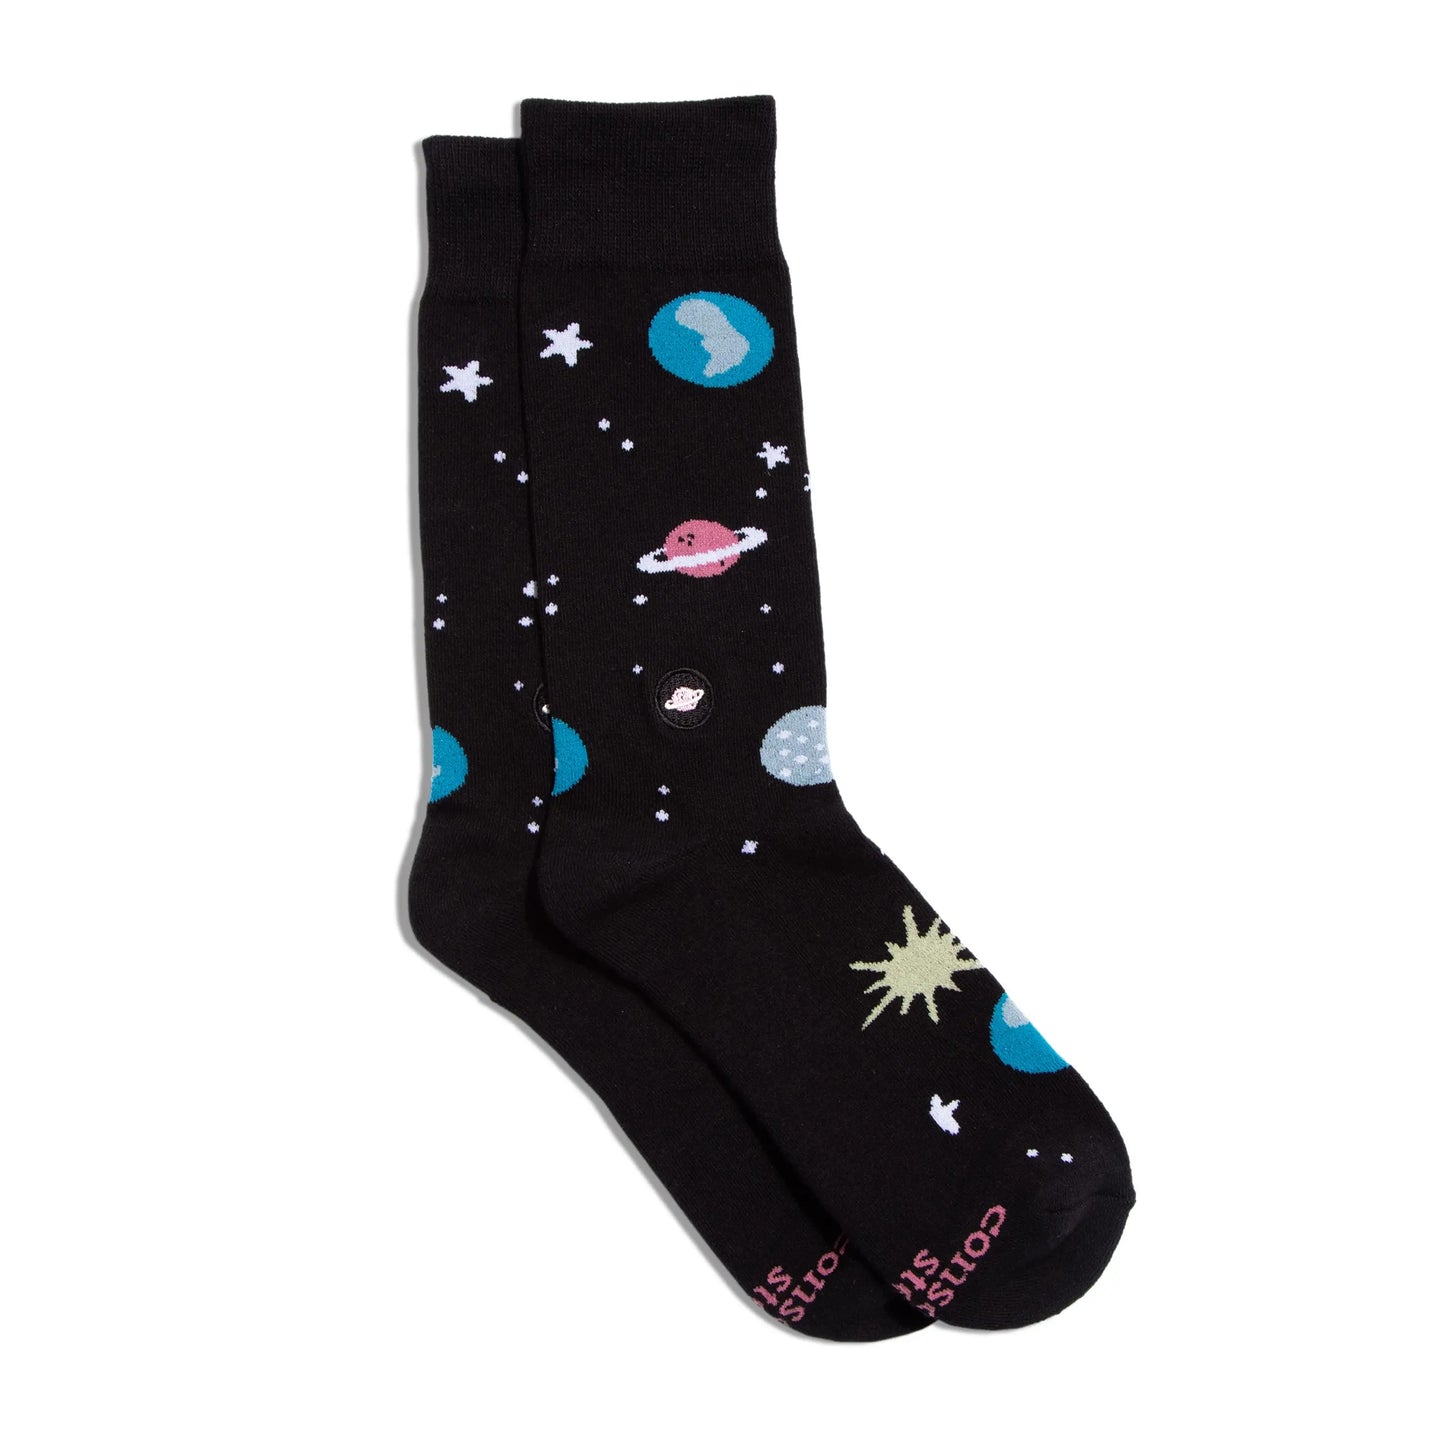 Socks That Support Galaxy Exploration